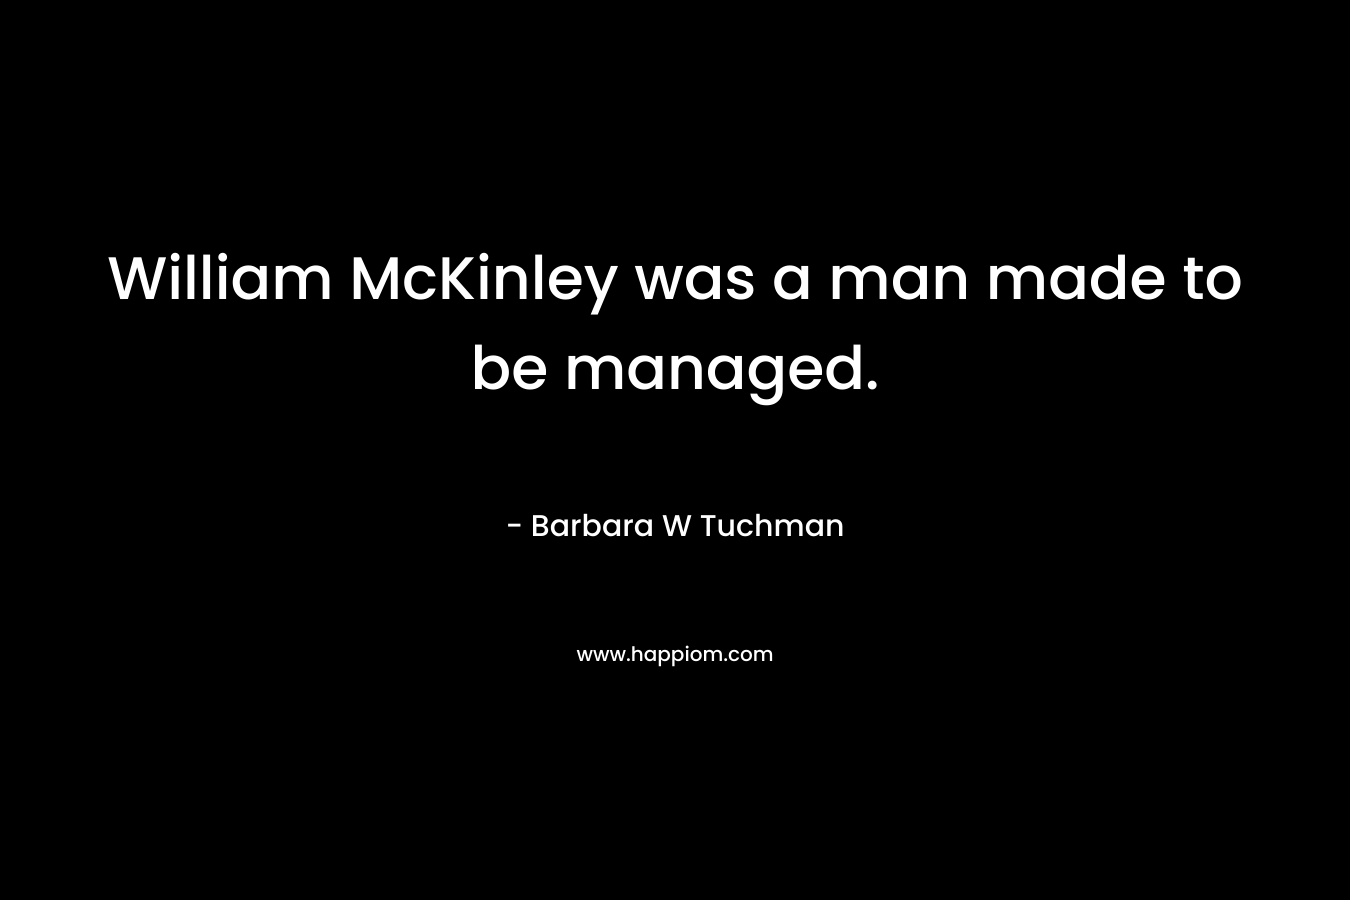 William McKinley was a man made to be managed.